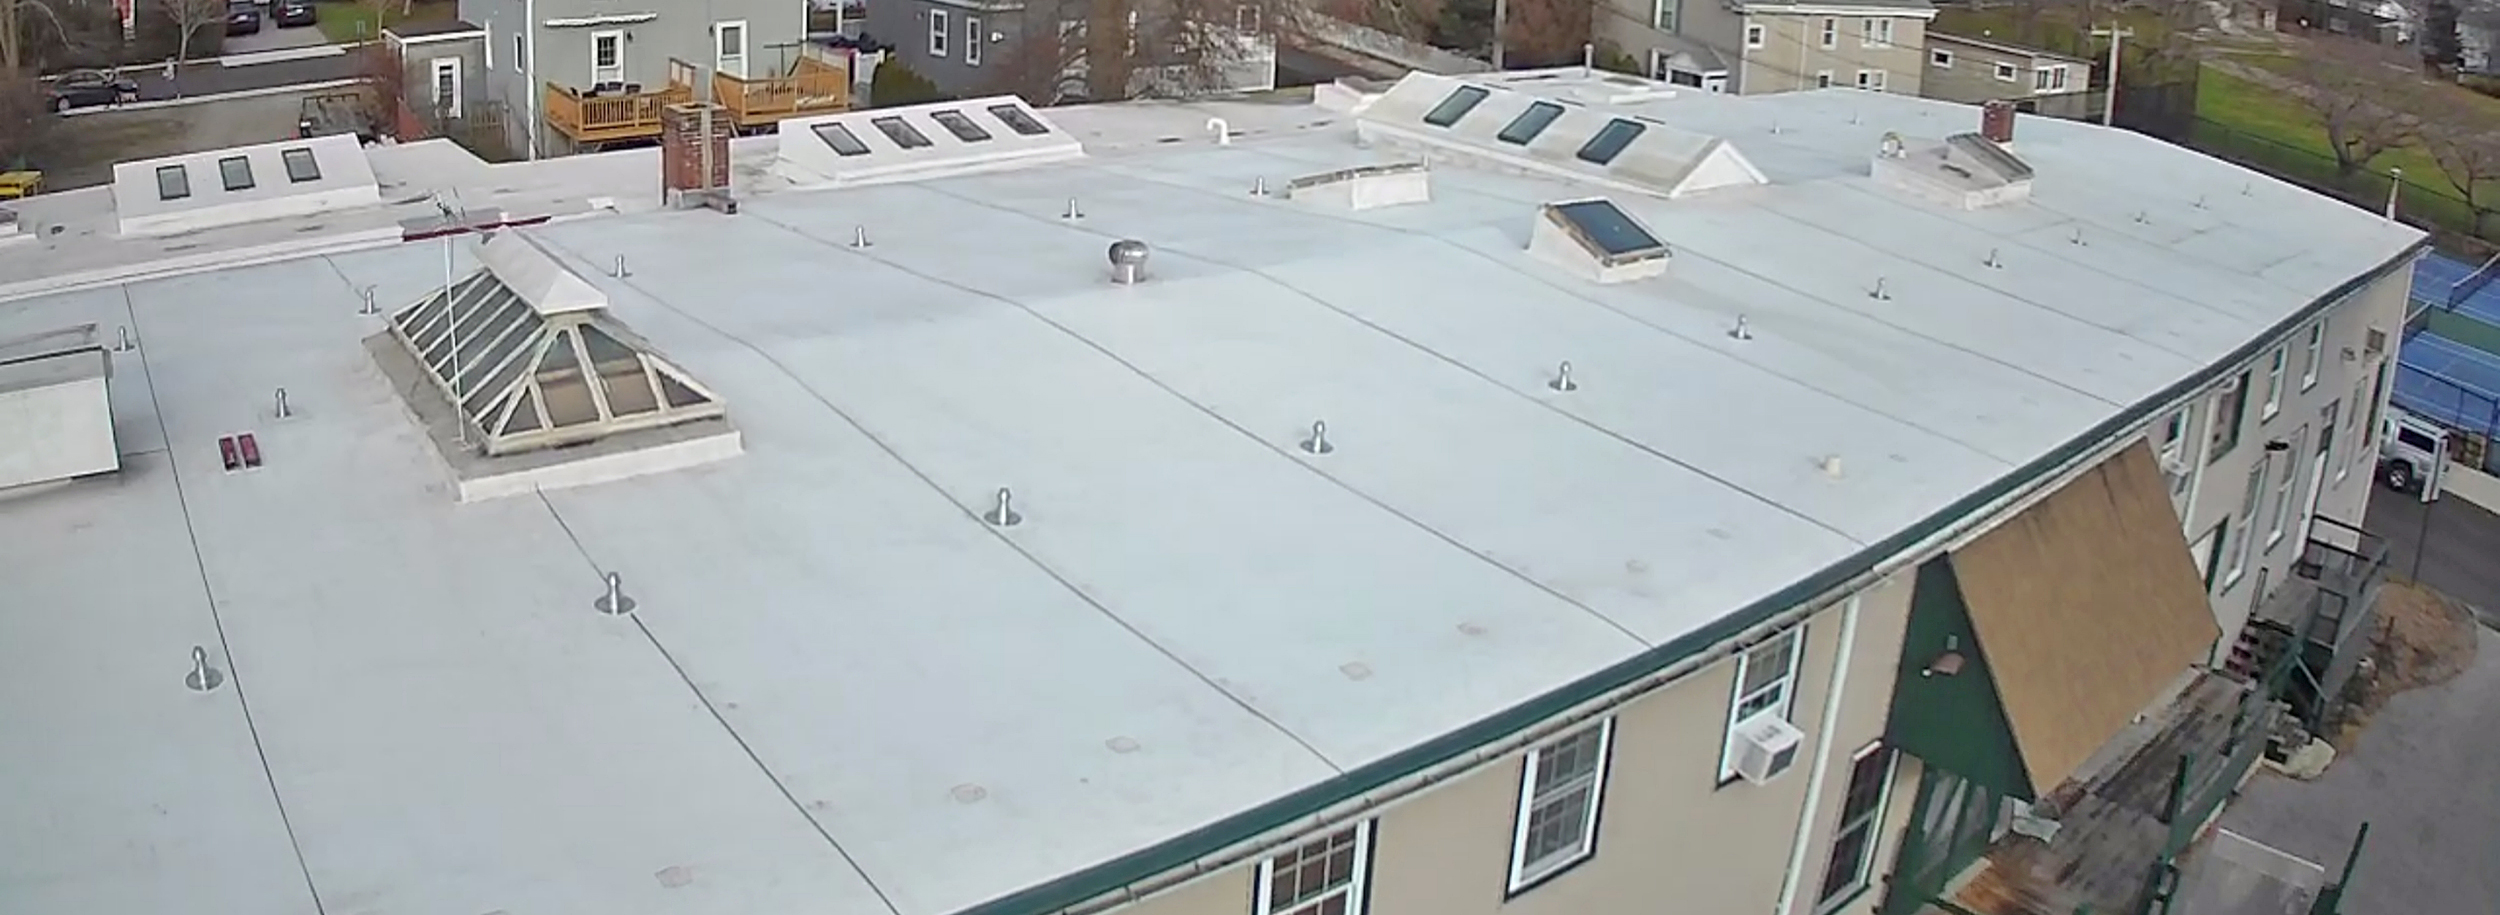 TPO roof material installation by newport construction services